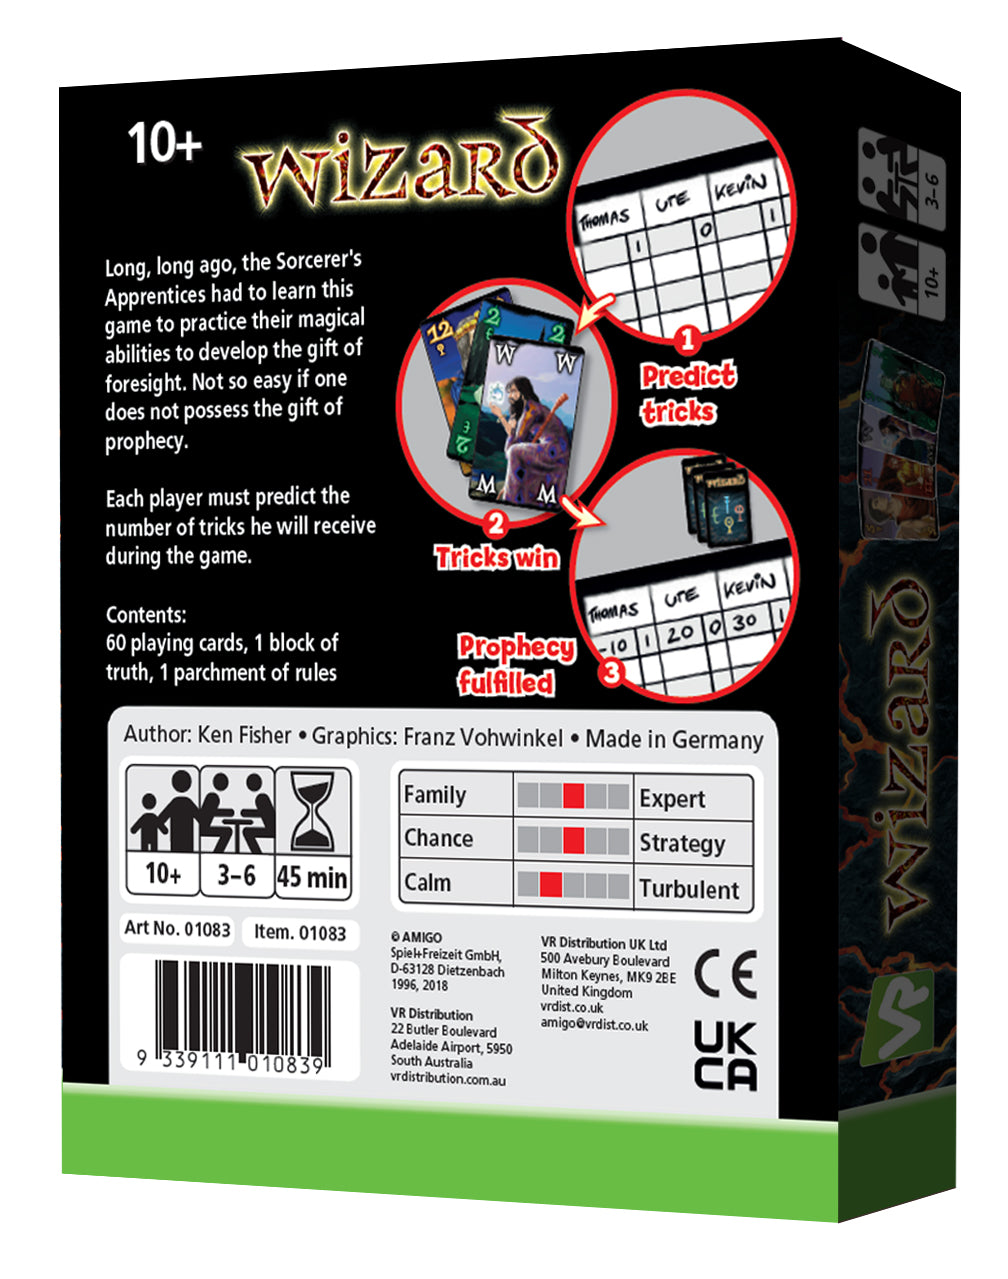 Wizard | Tabernacle Games